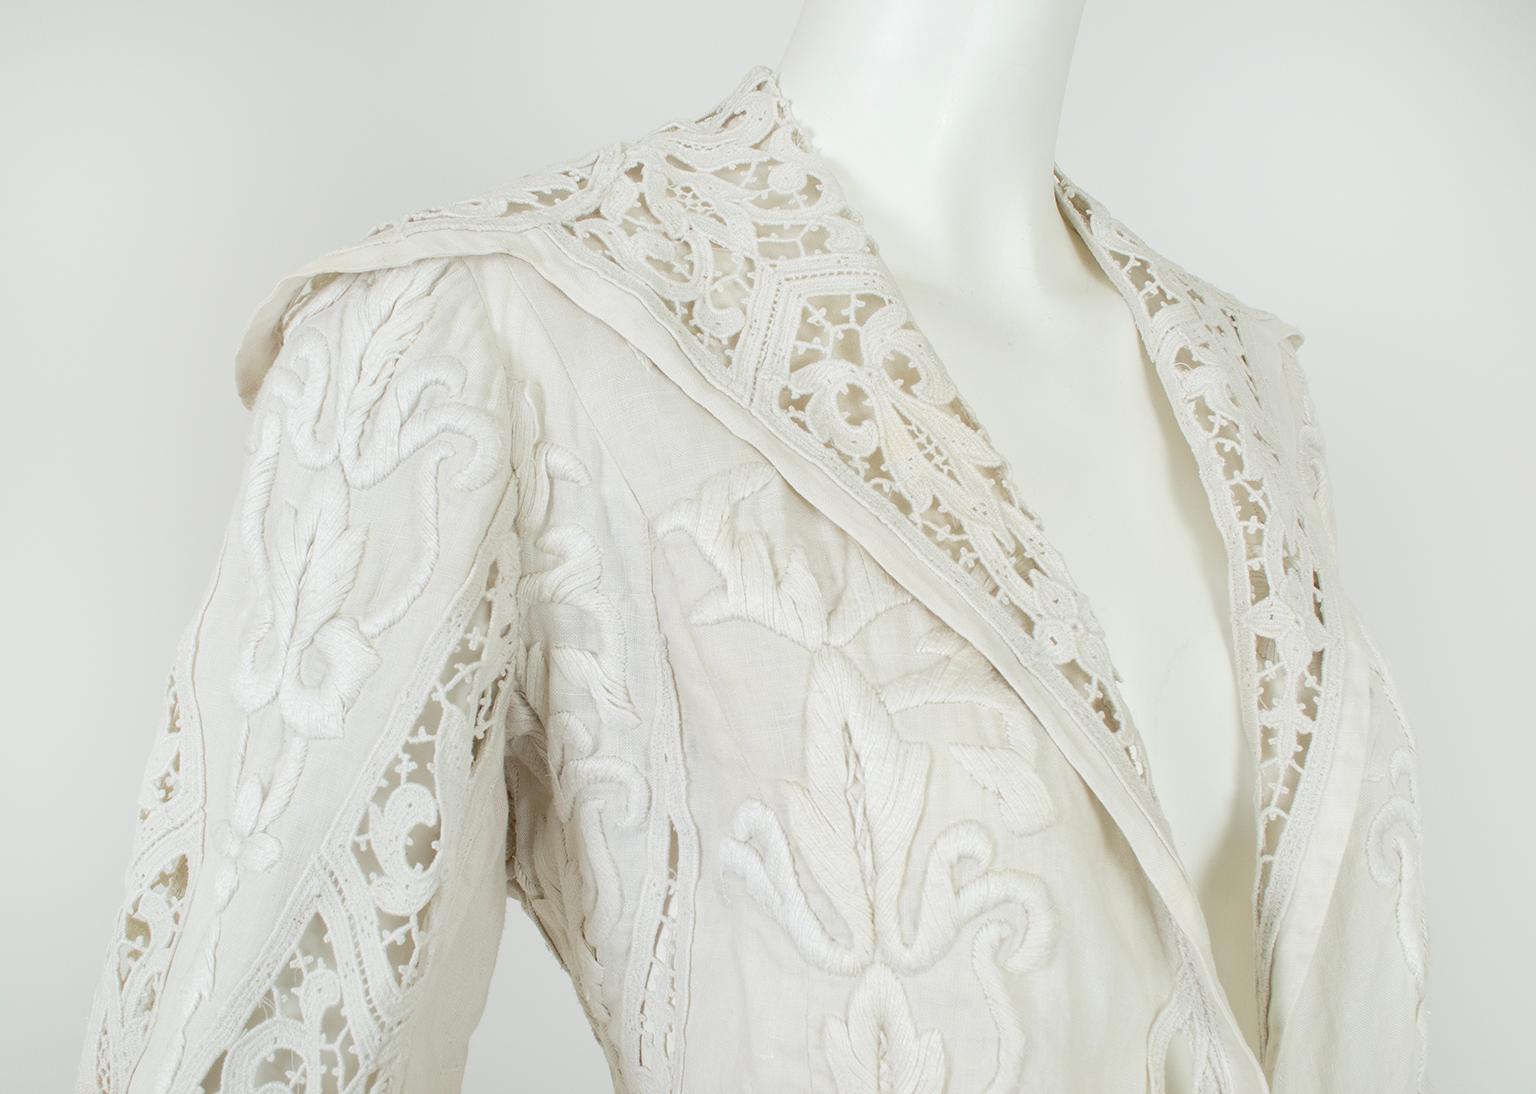 Edwardian White Irish Crochet and Cotton Walking or Wedding Suit – L, 1900s For Sale 5